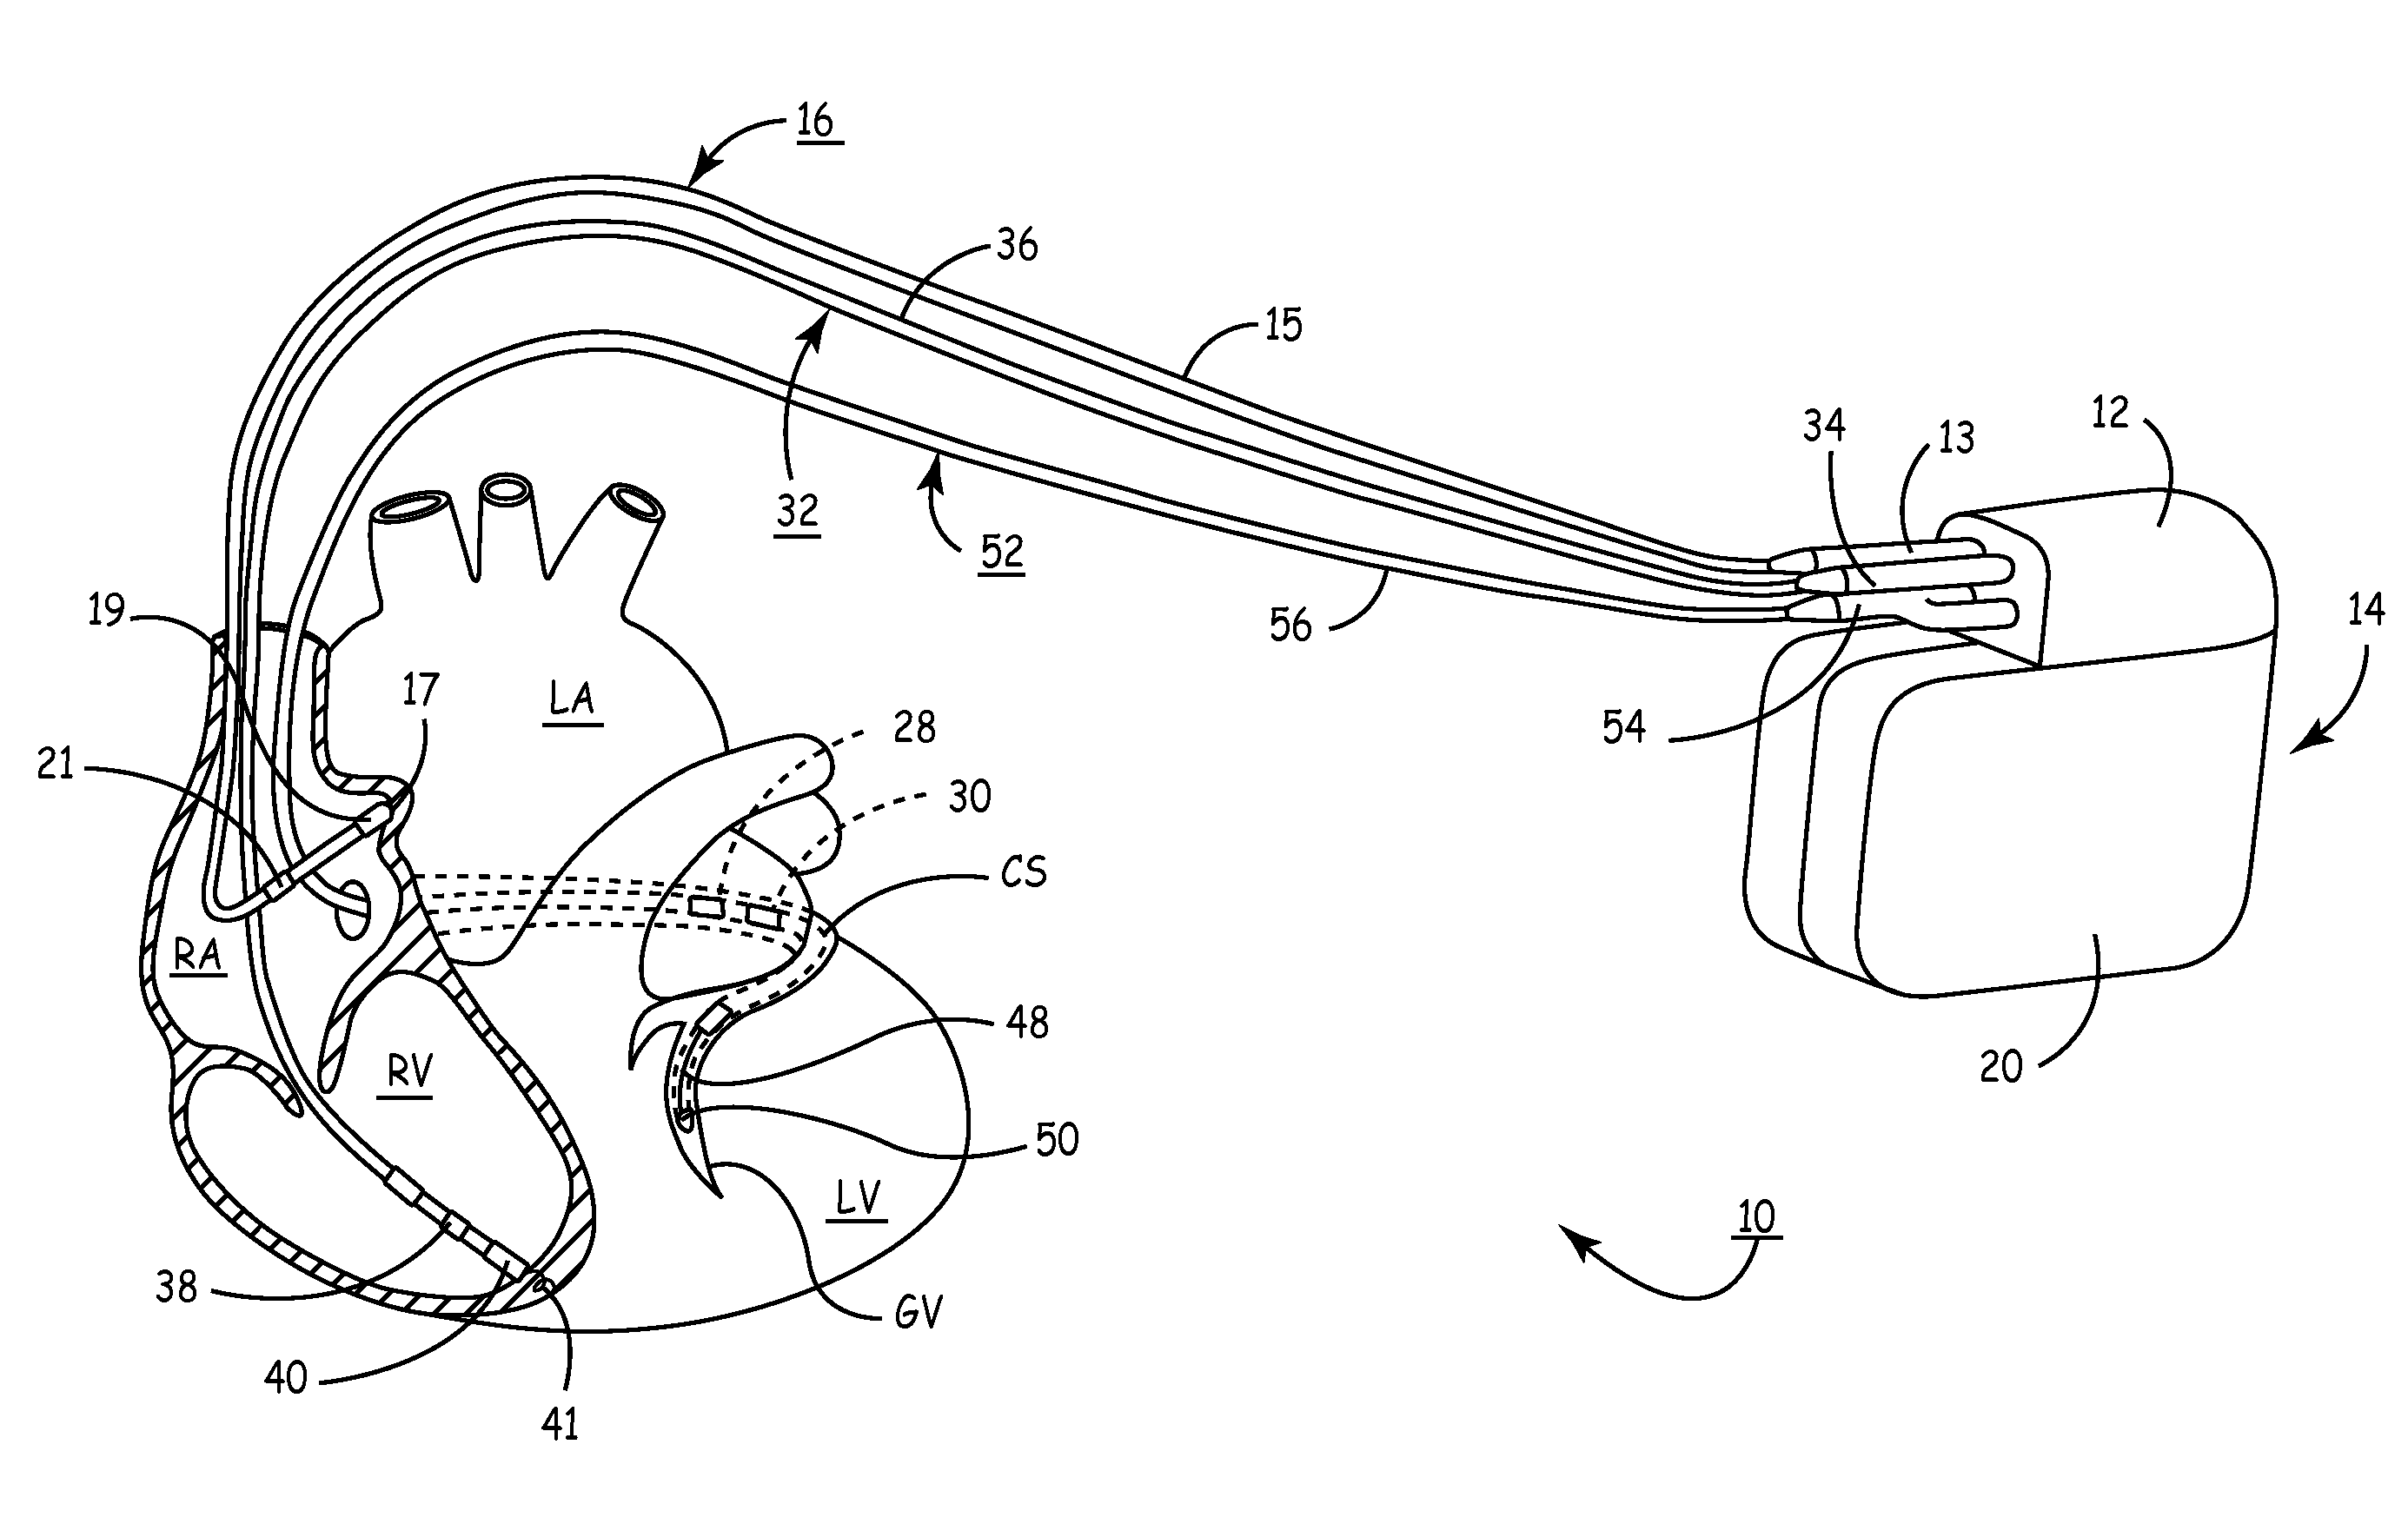 Apparatus and methods for automatic adjustment of av interval to ensure delivery of cardiac resynchronization therapy